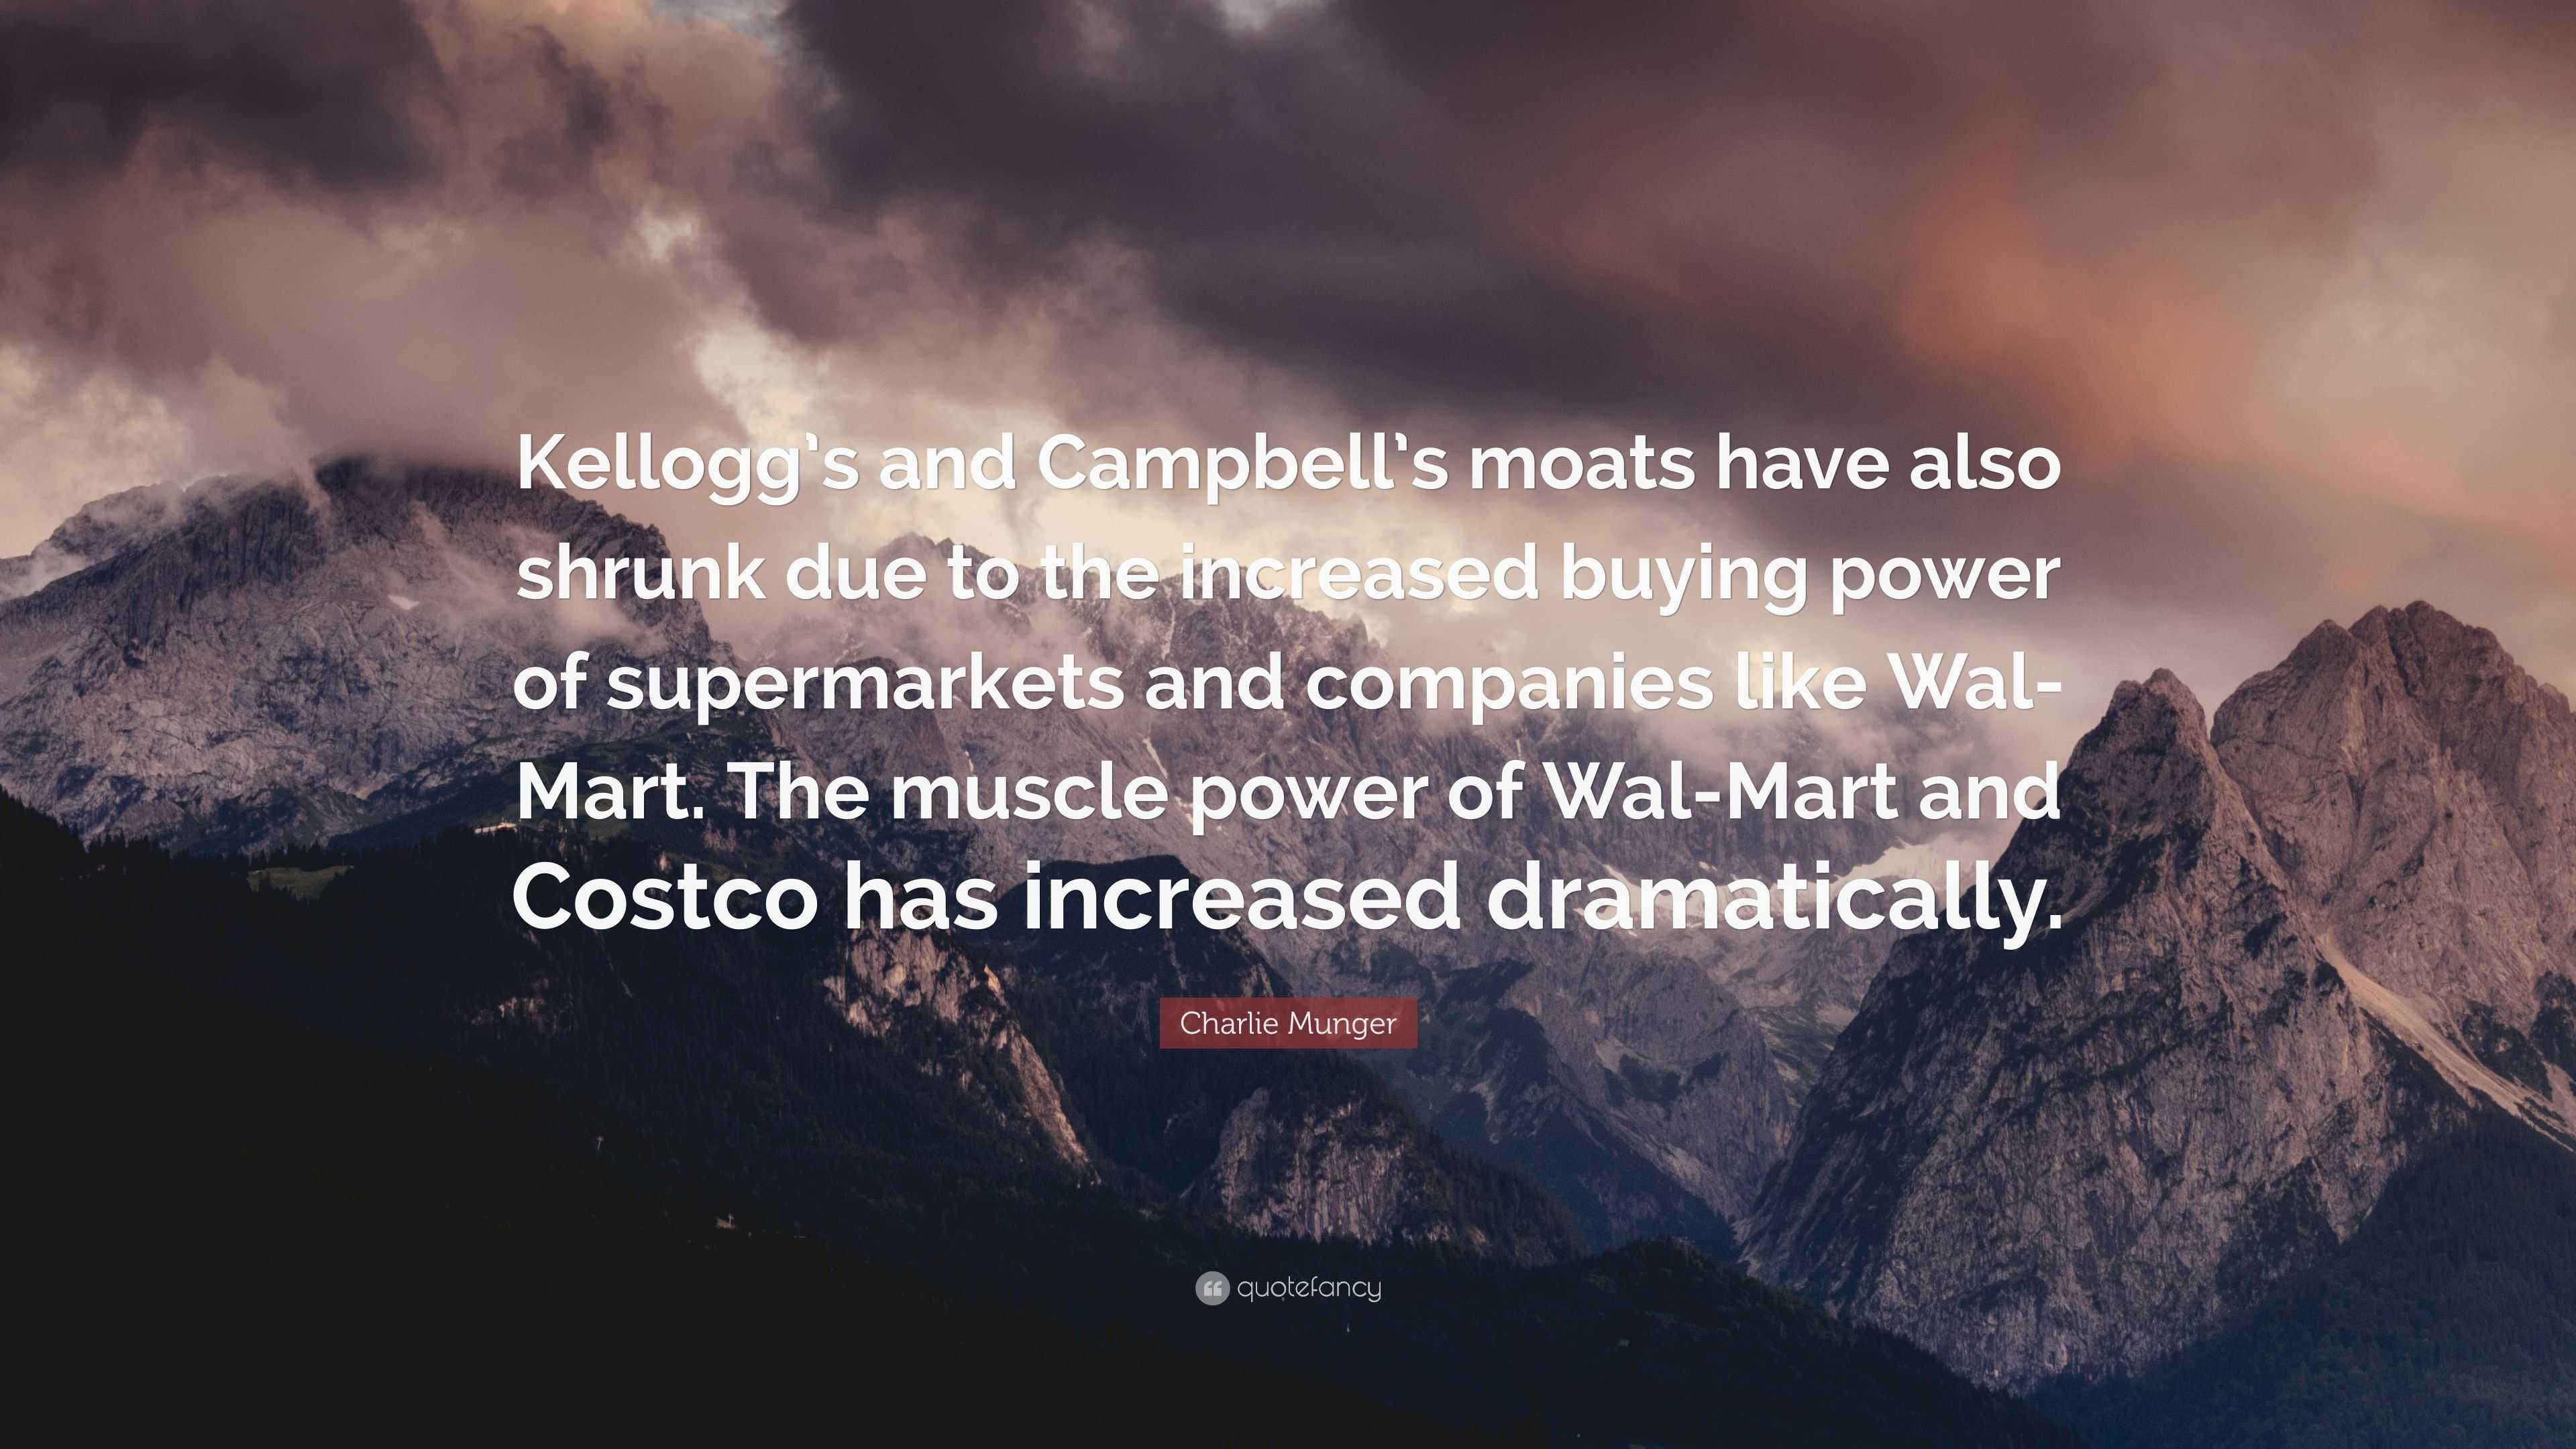 Charlie Munger Quote: “Kellogg’s and Campbell’s moats have also shrunk ...